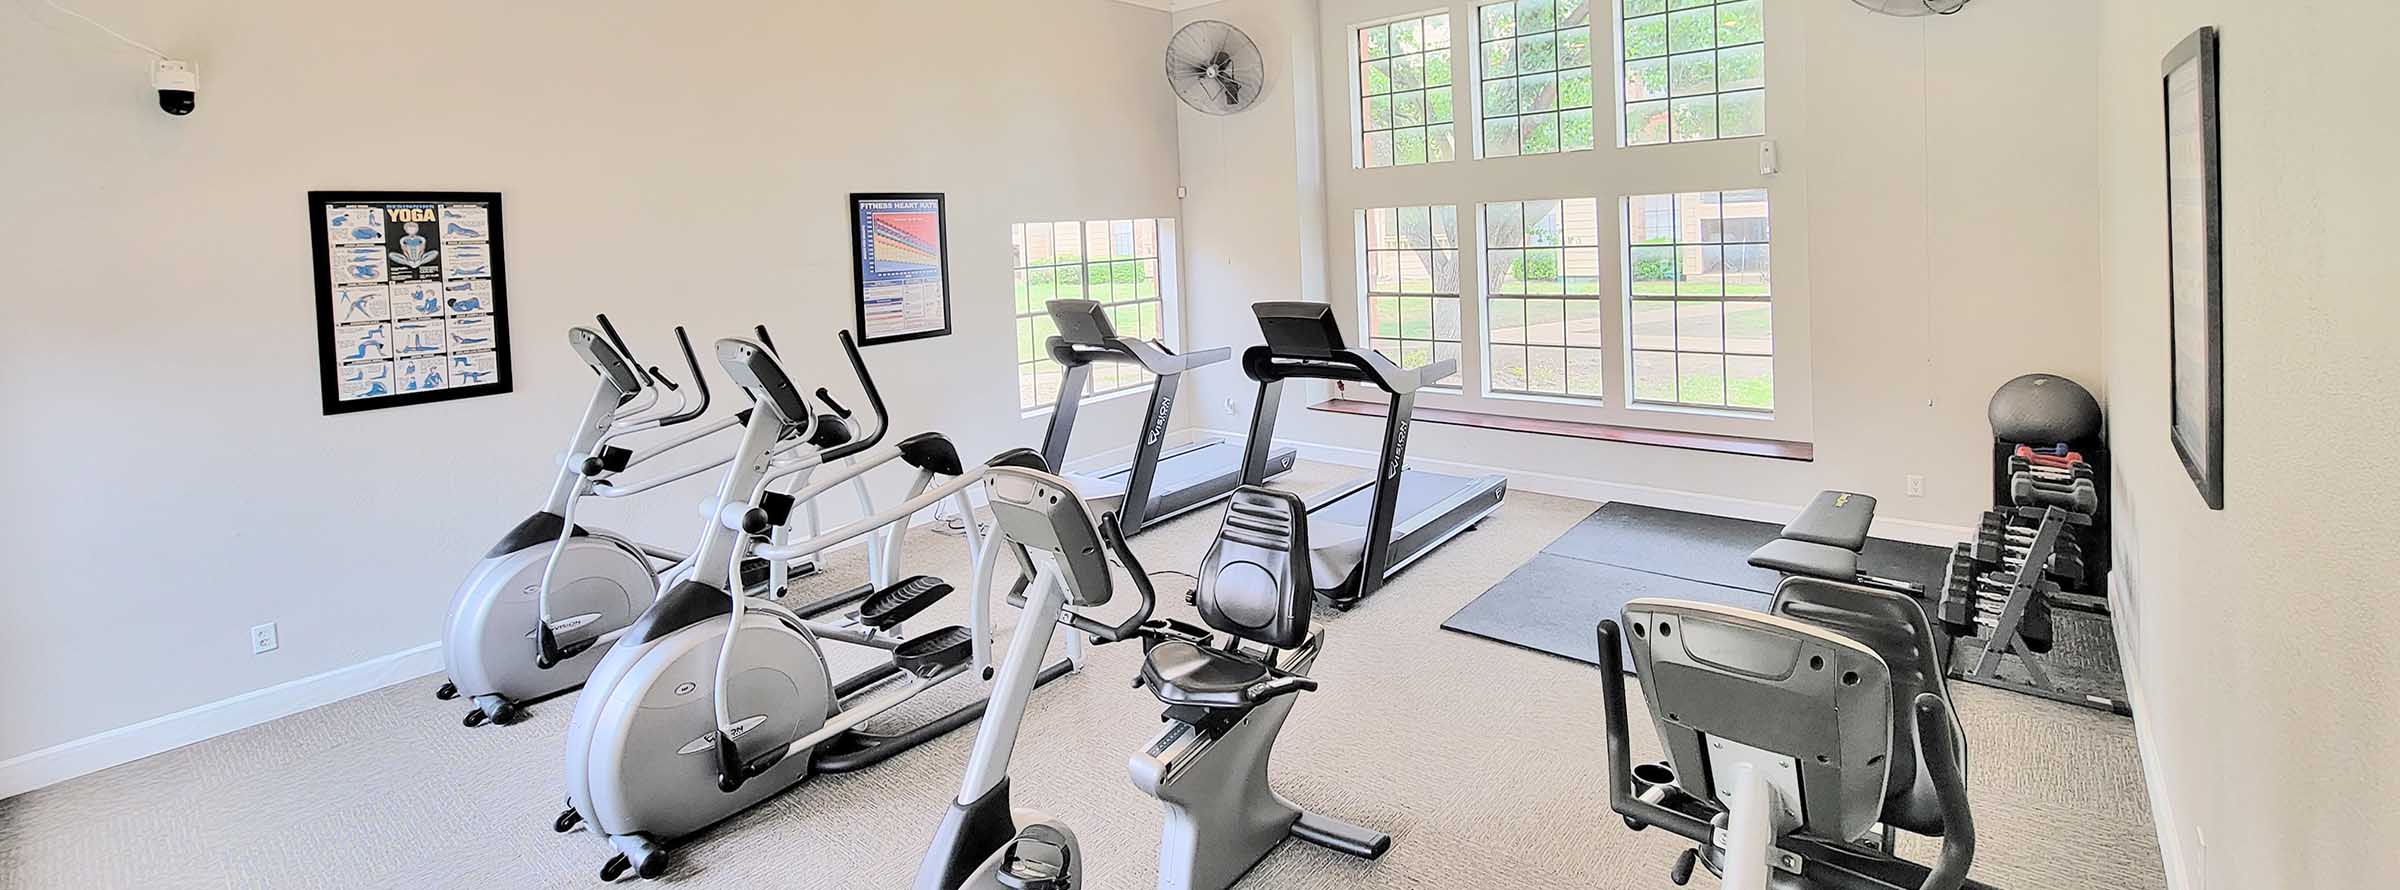 State of the art fitness center